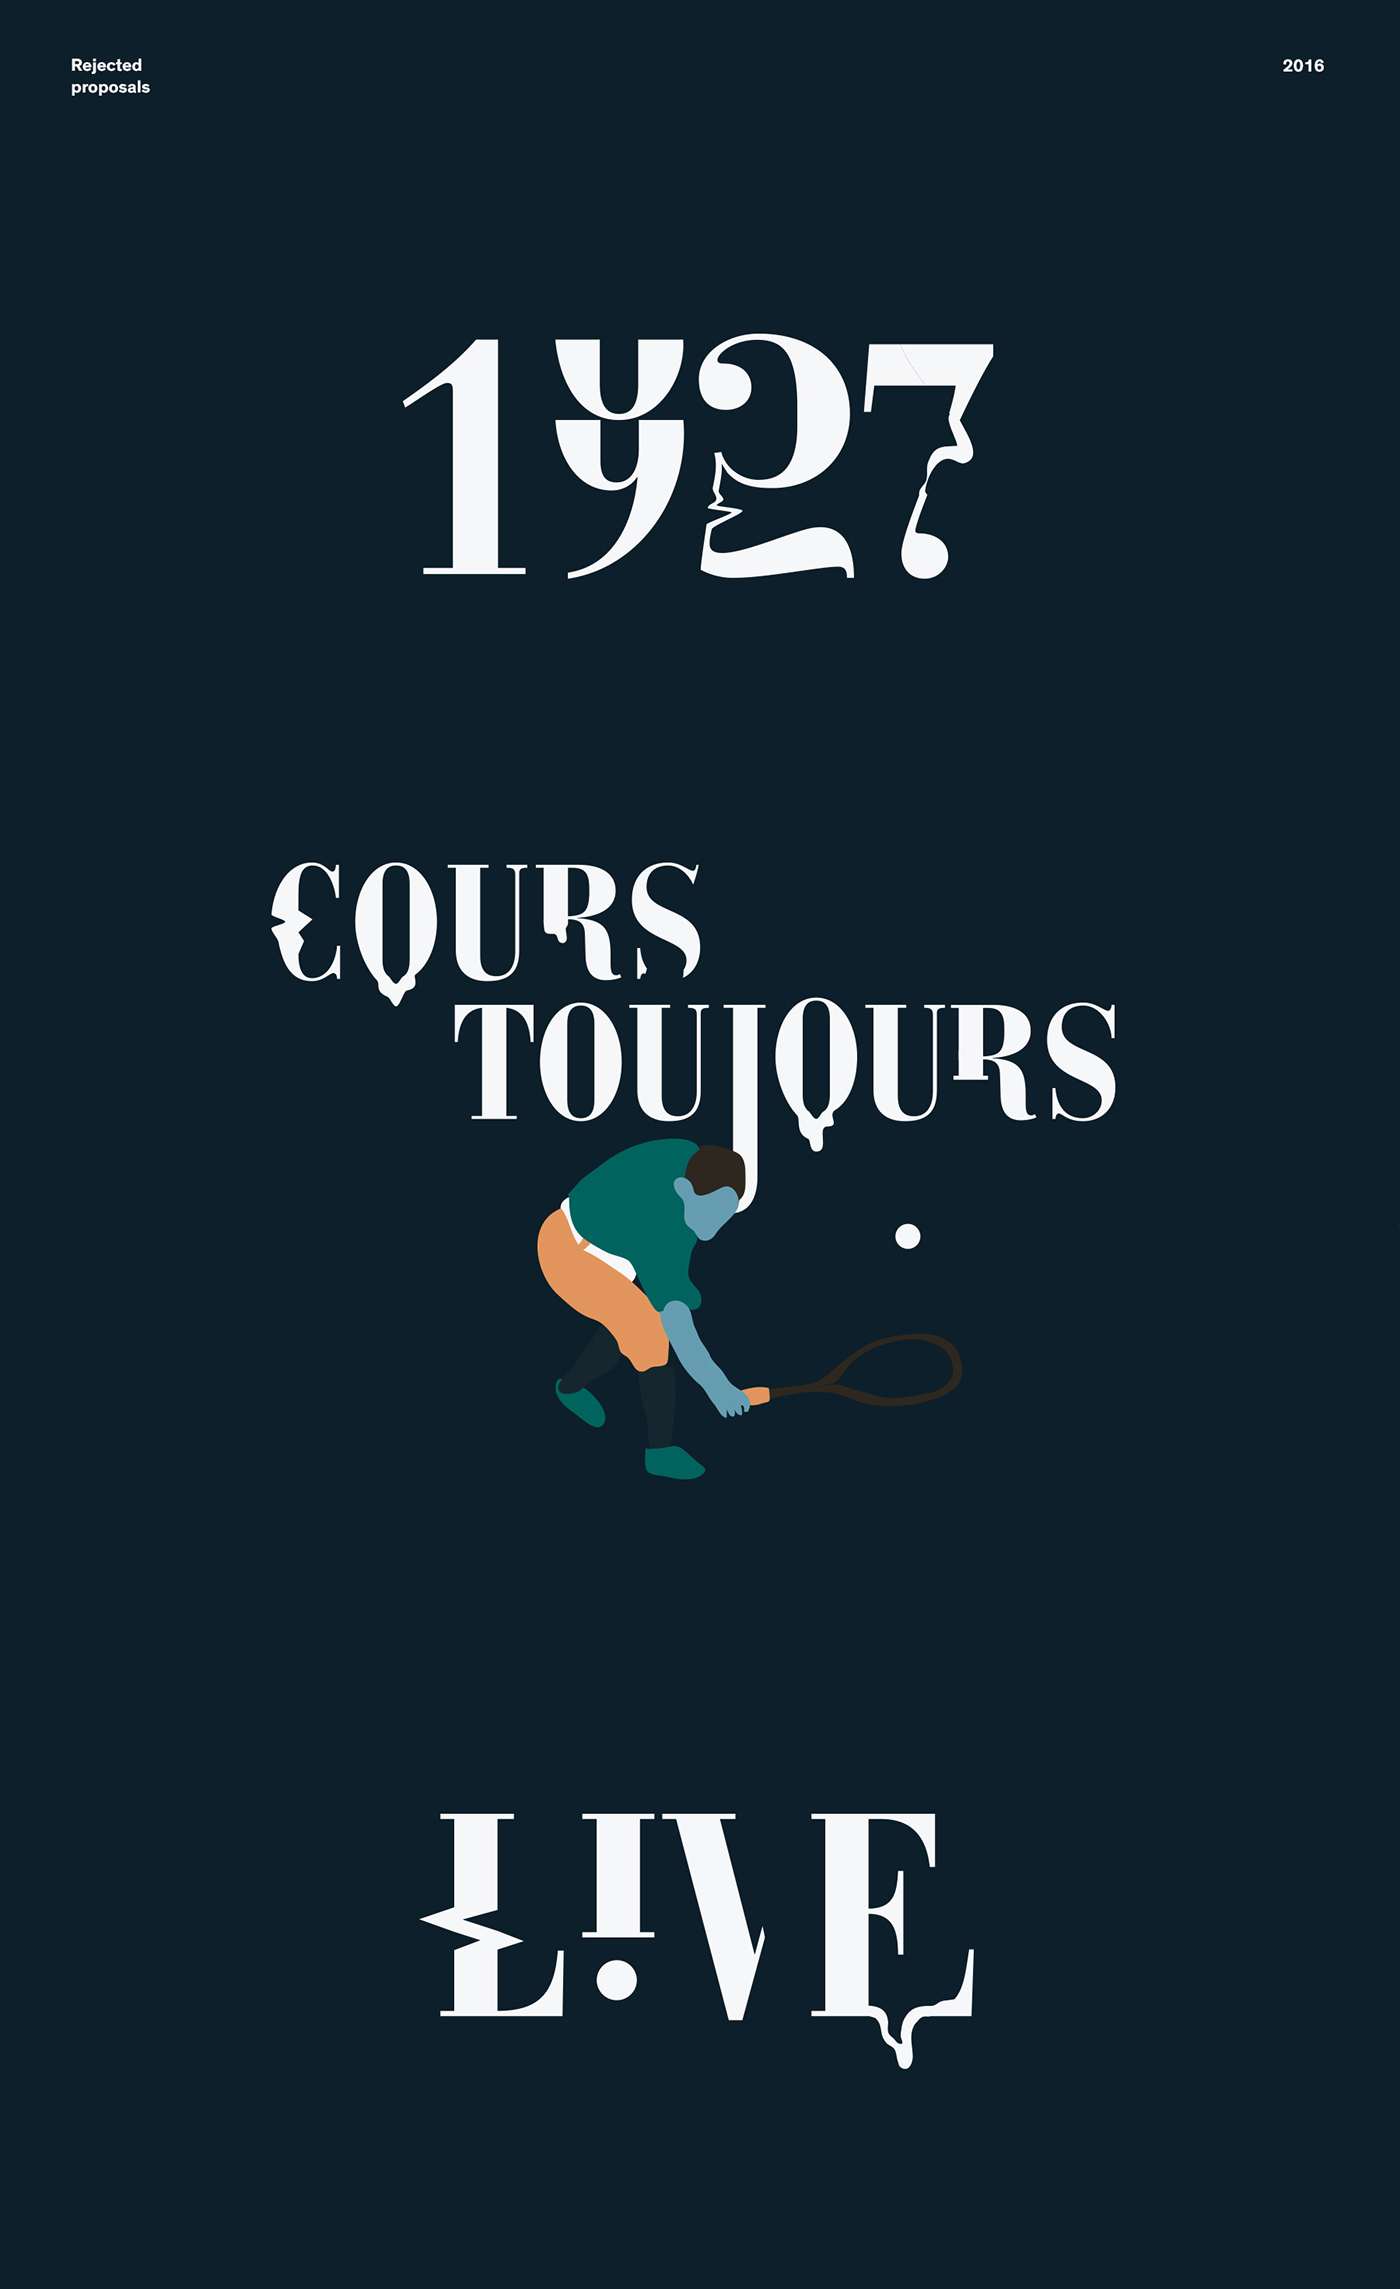 lacoste los caballos  buenos aires argentina france Paris tshirts shirts tennis Lacoste live sport Clothing pattern type